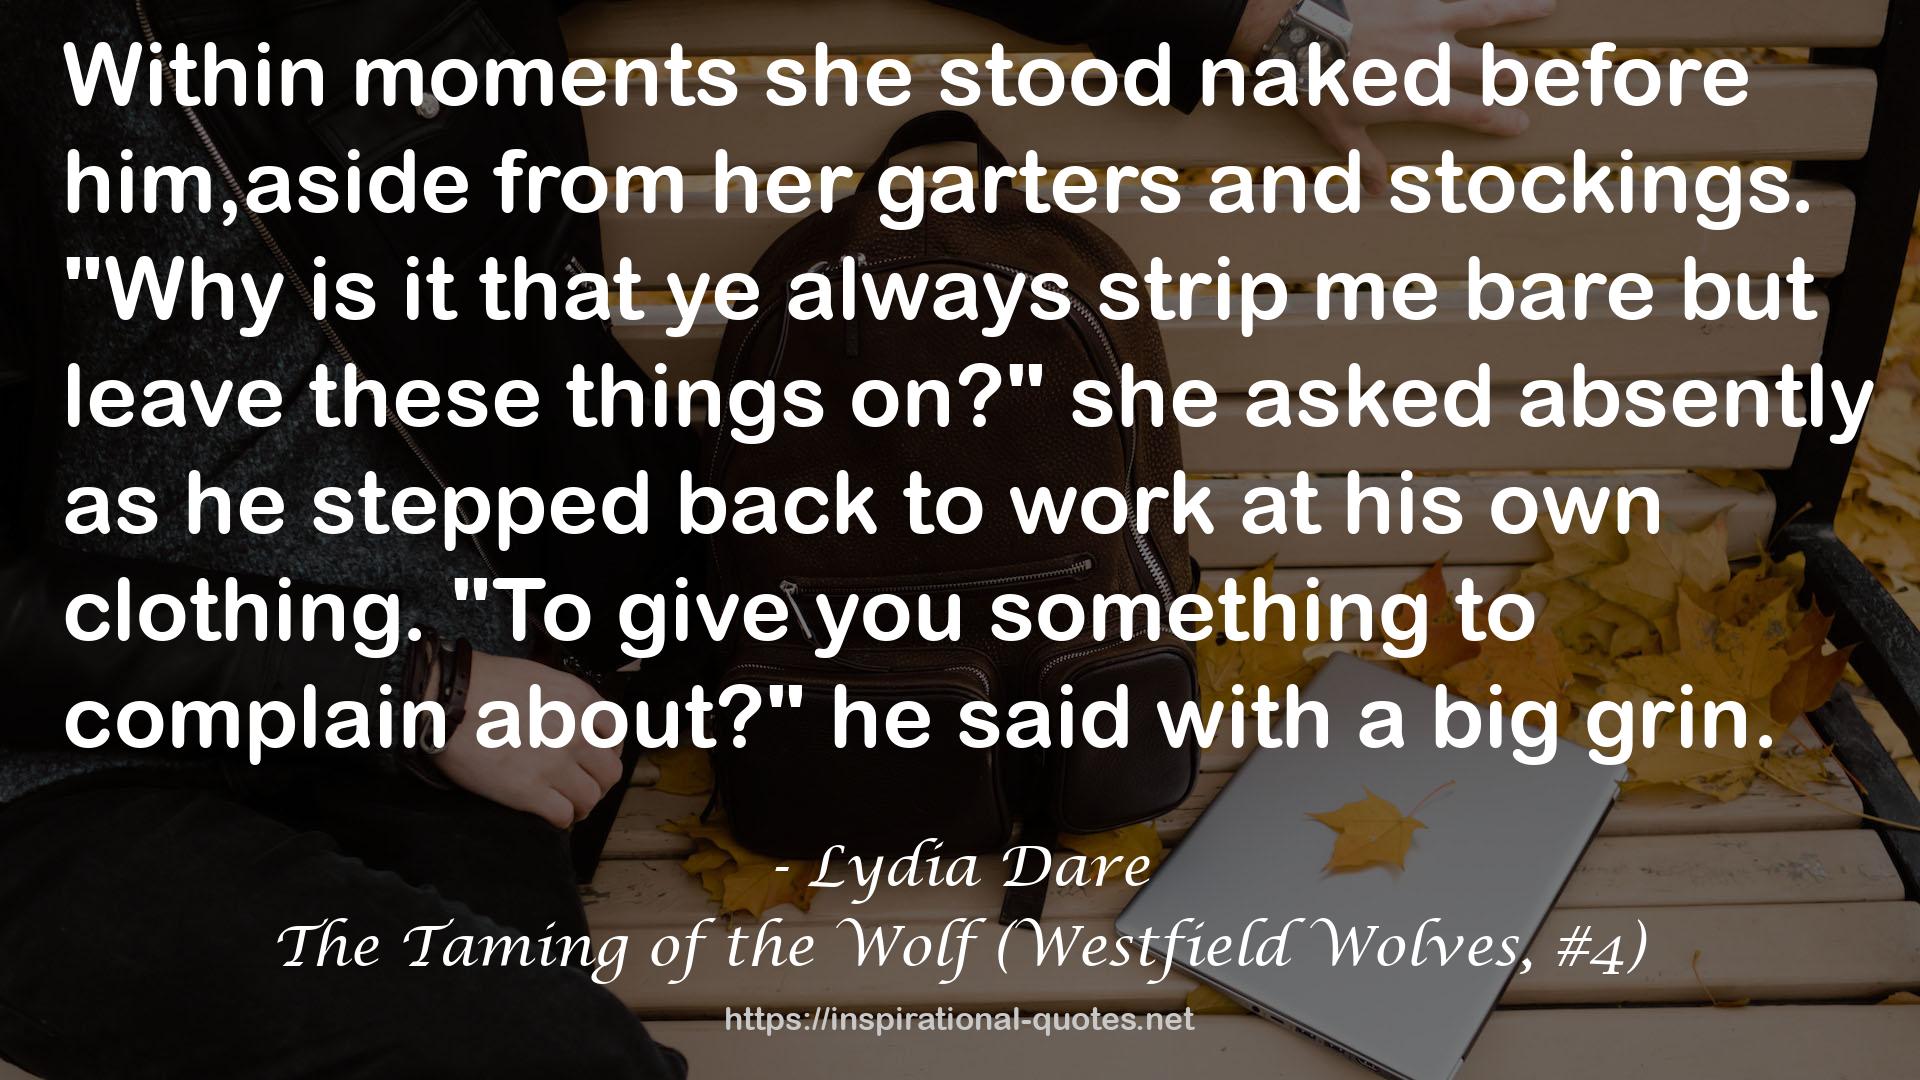 The Taming of the Wolf (Westfield Wolves, #4) QUOTES